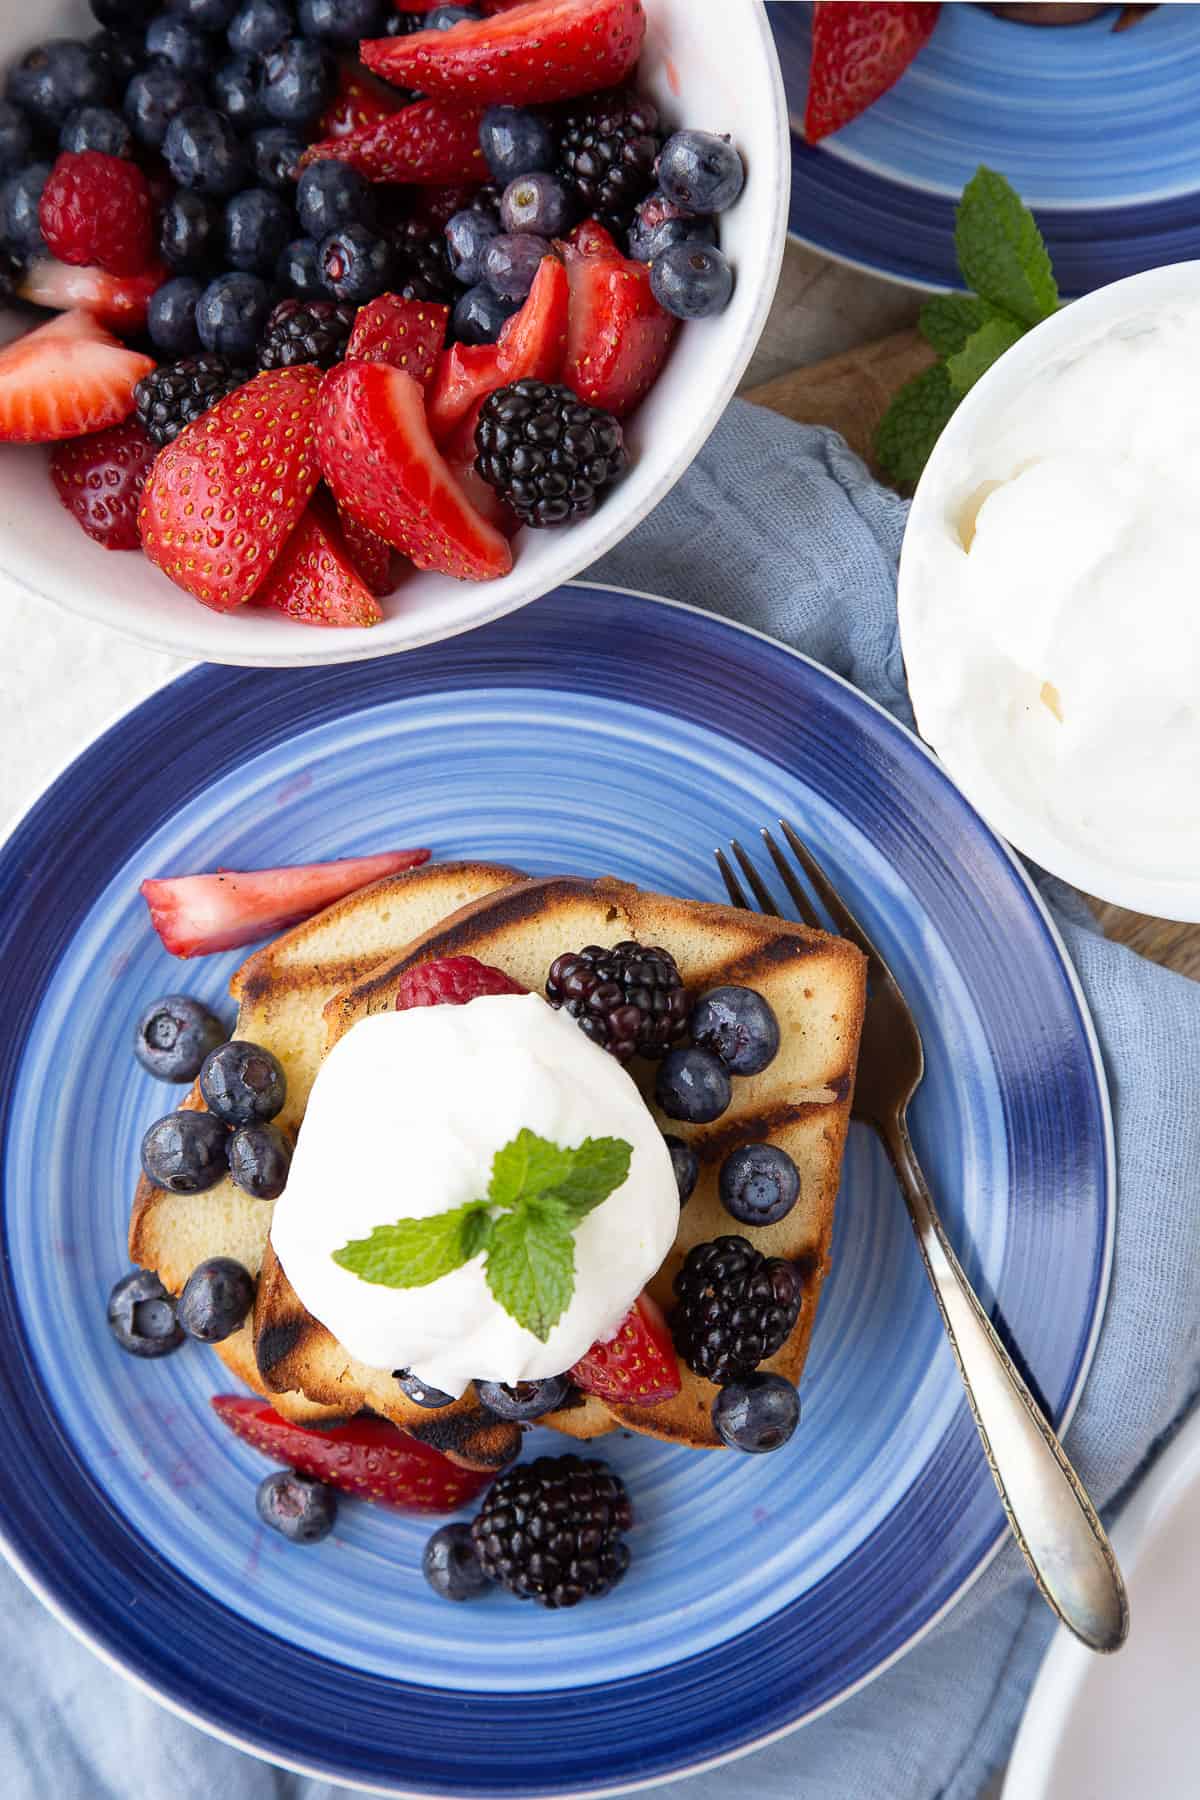 grilled pound cake with berries and whipped cream on a blue plate.